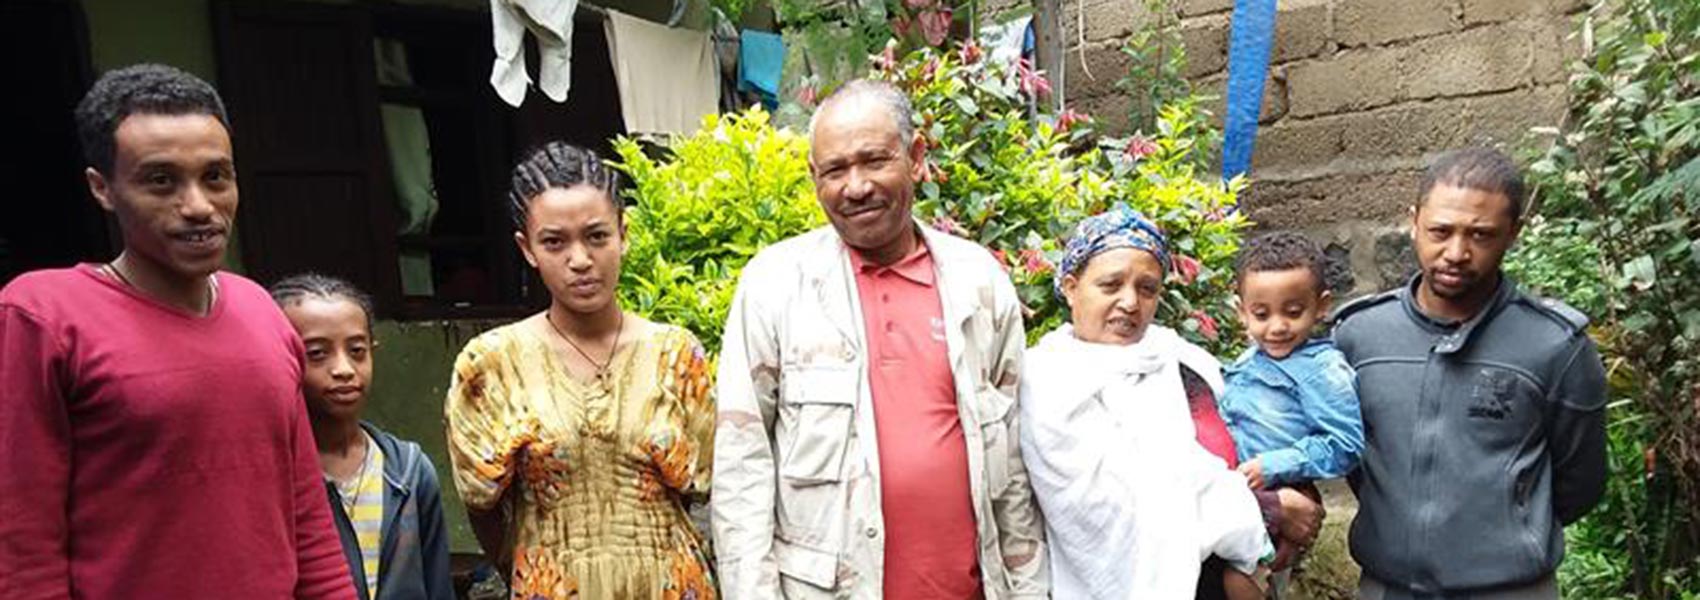 An Ethiopian family with their adopted daughter